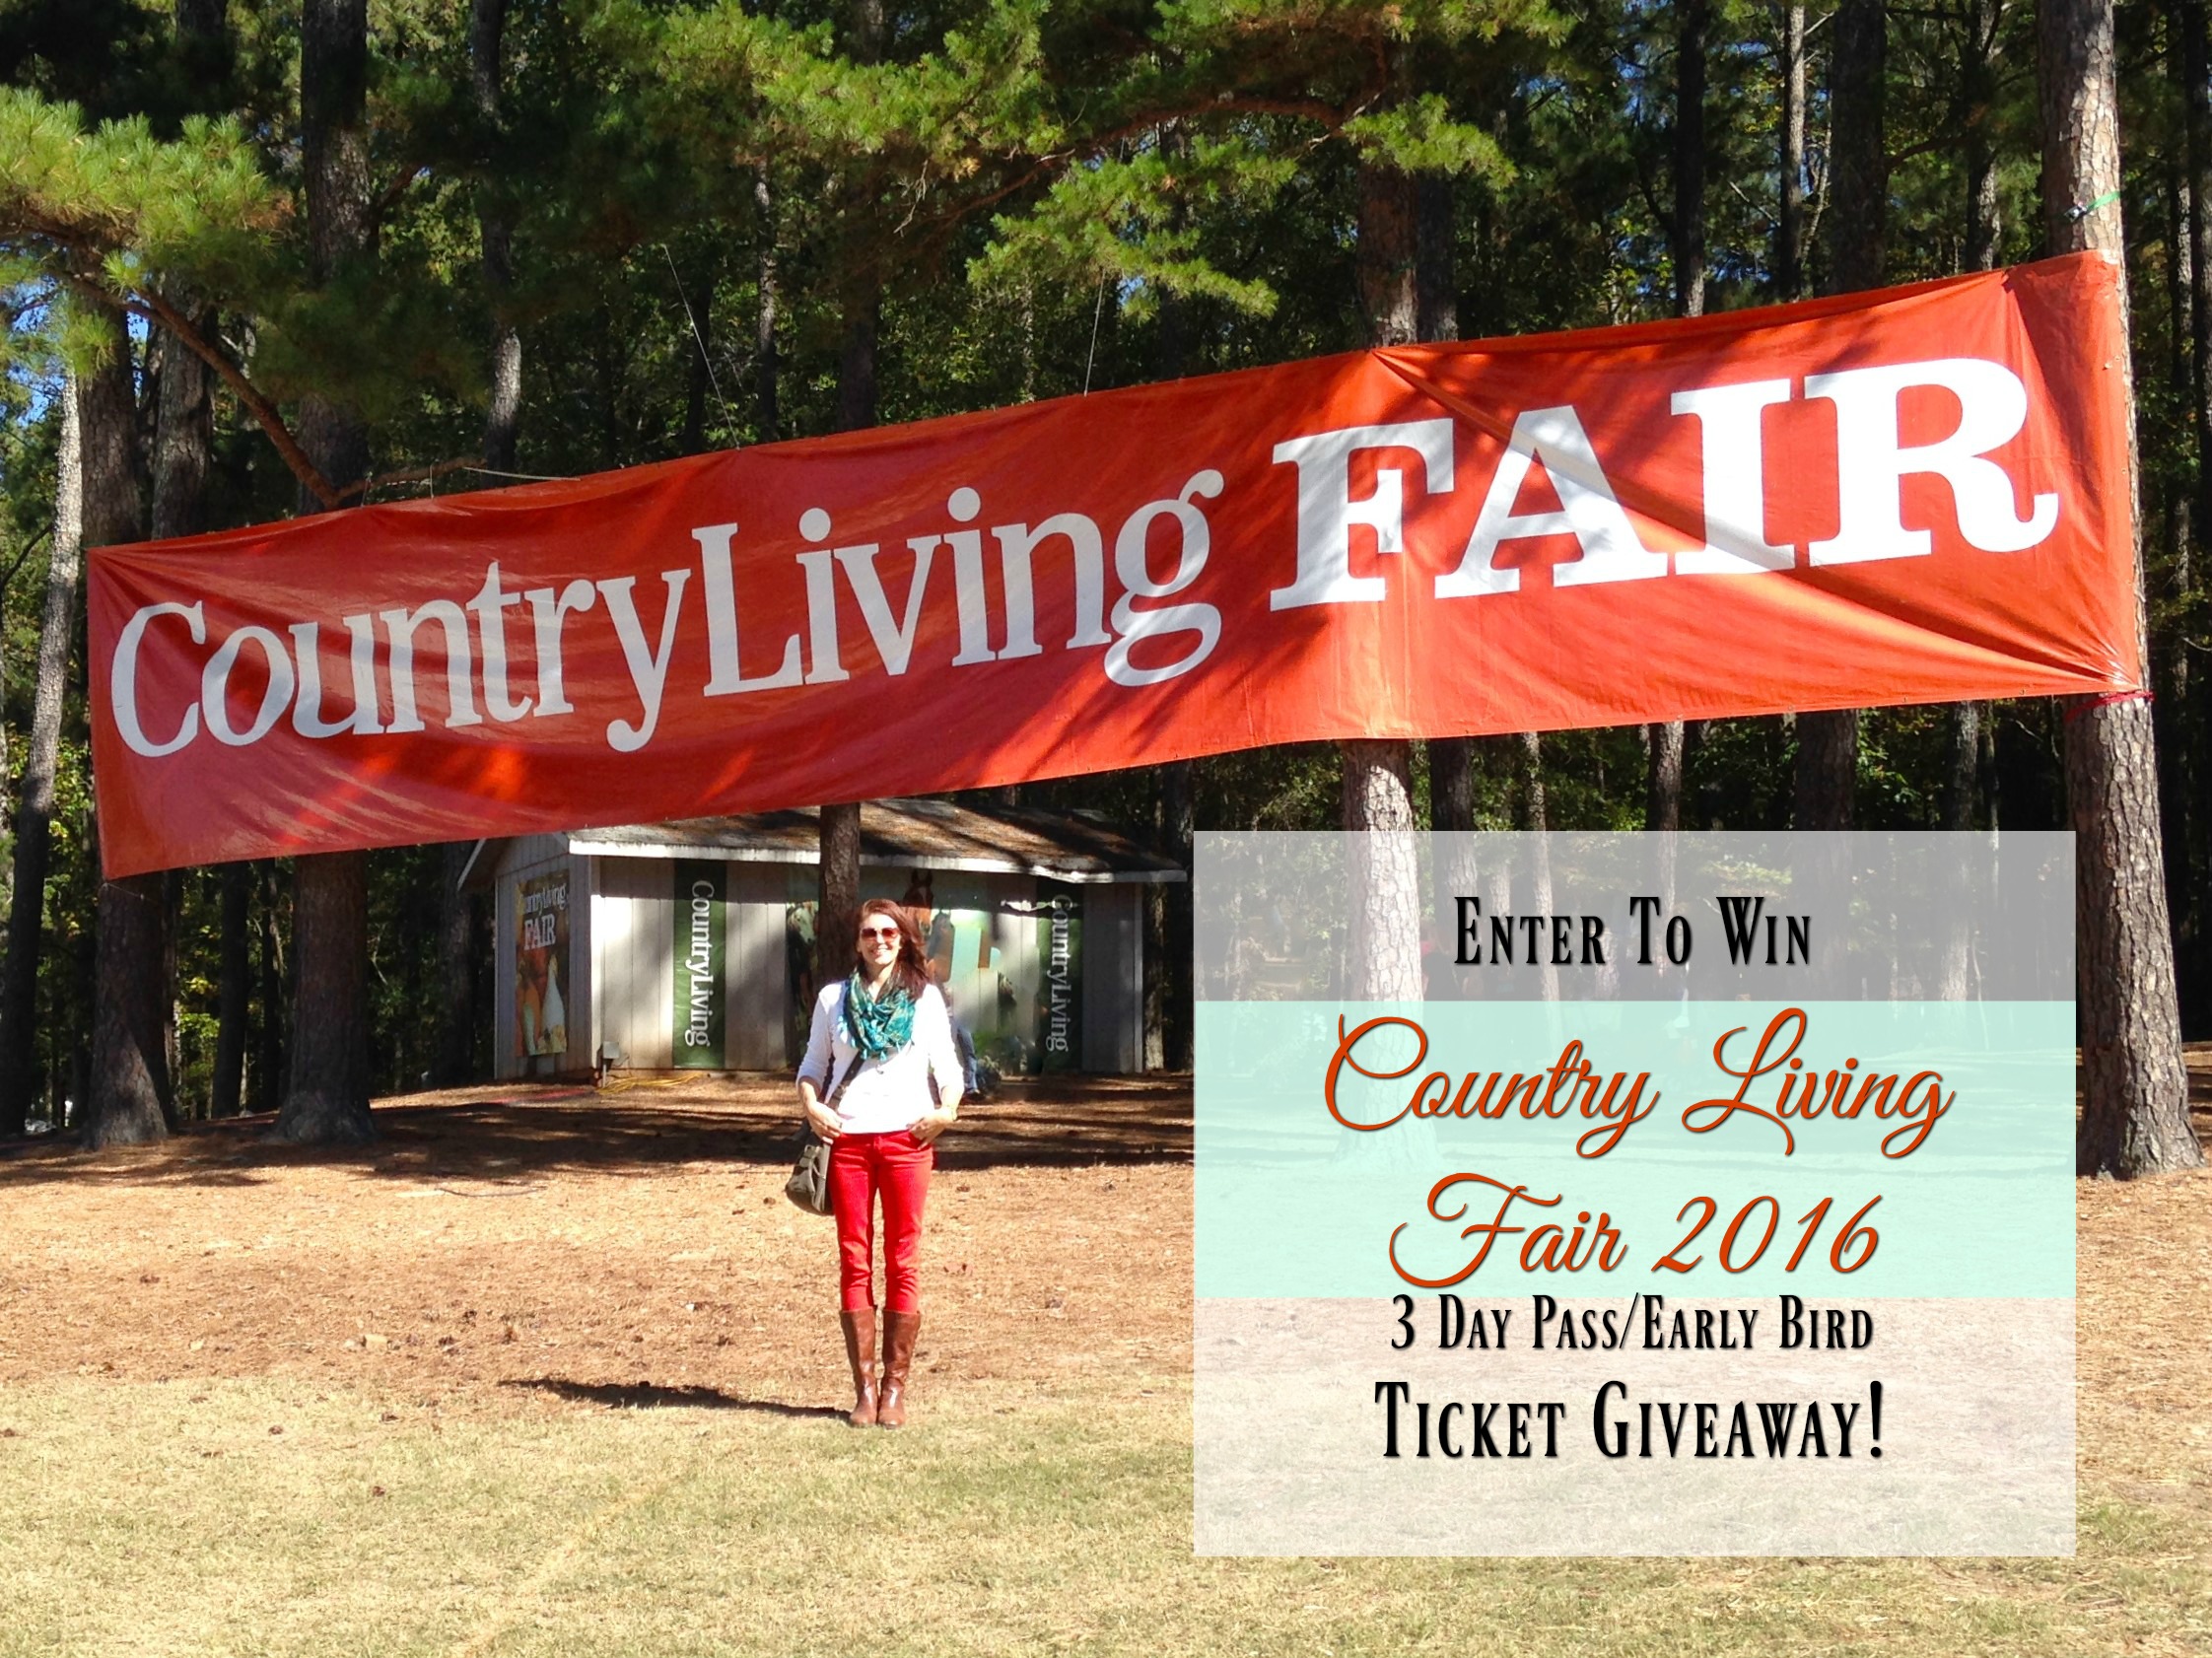 Country Living Fair Ticket Giveaway Come See Mandy On Stage Sumptuous Living